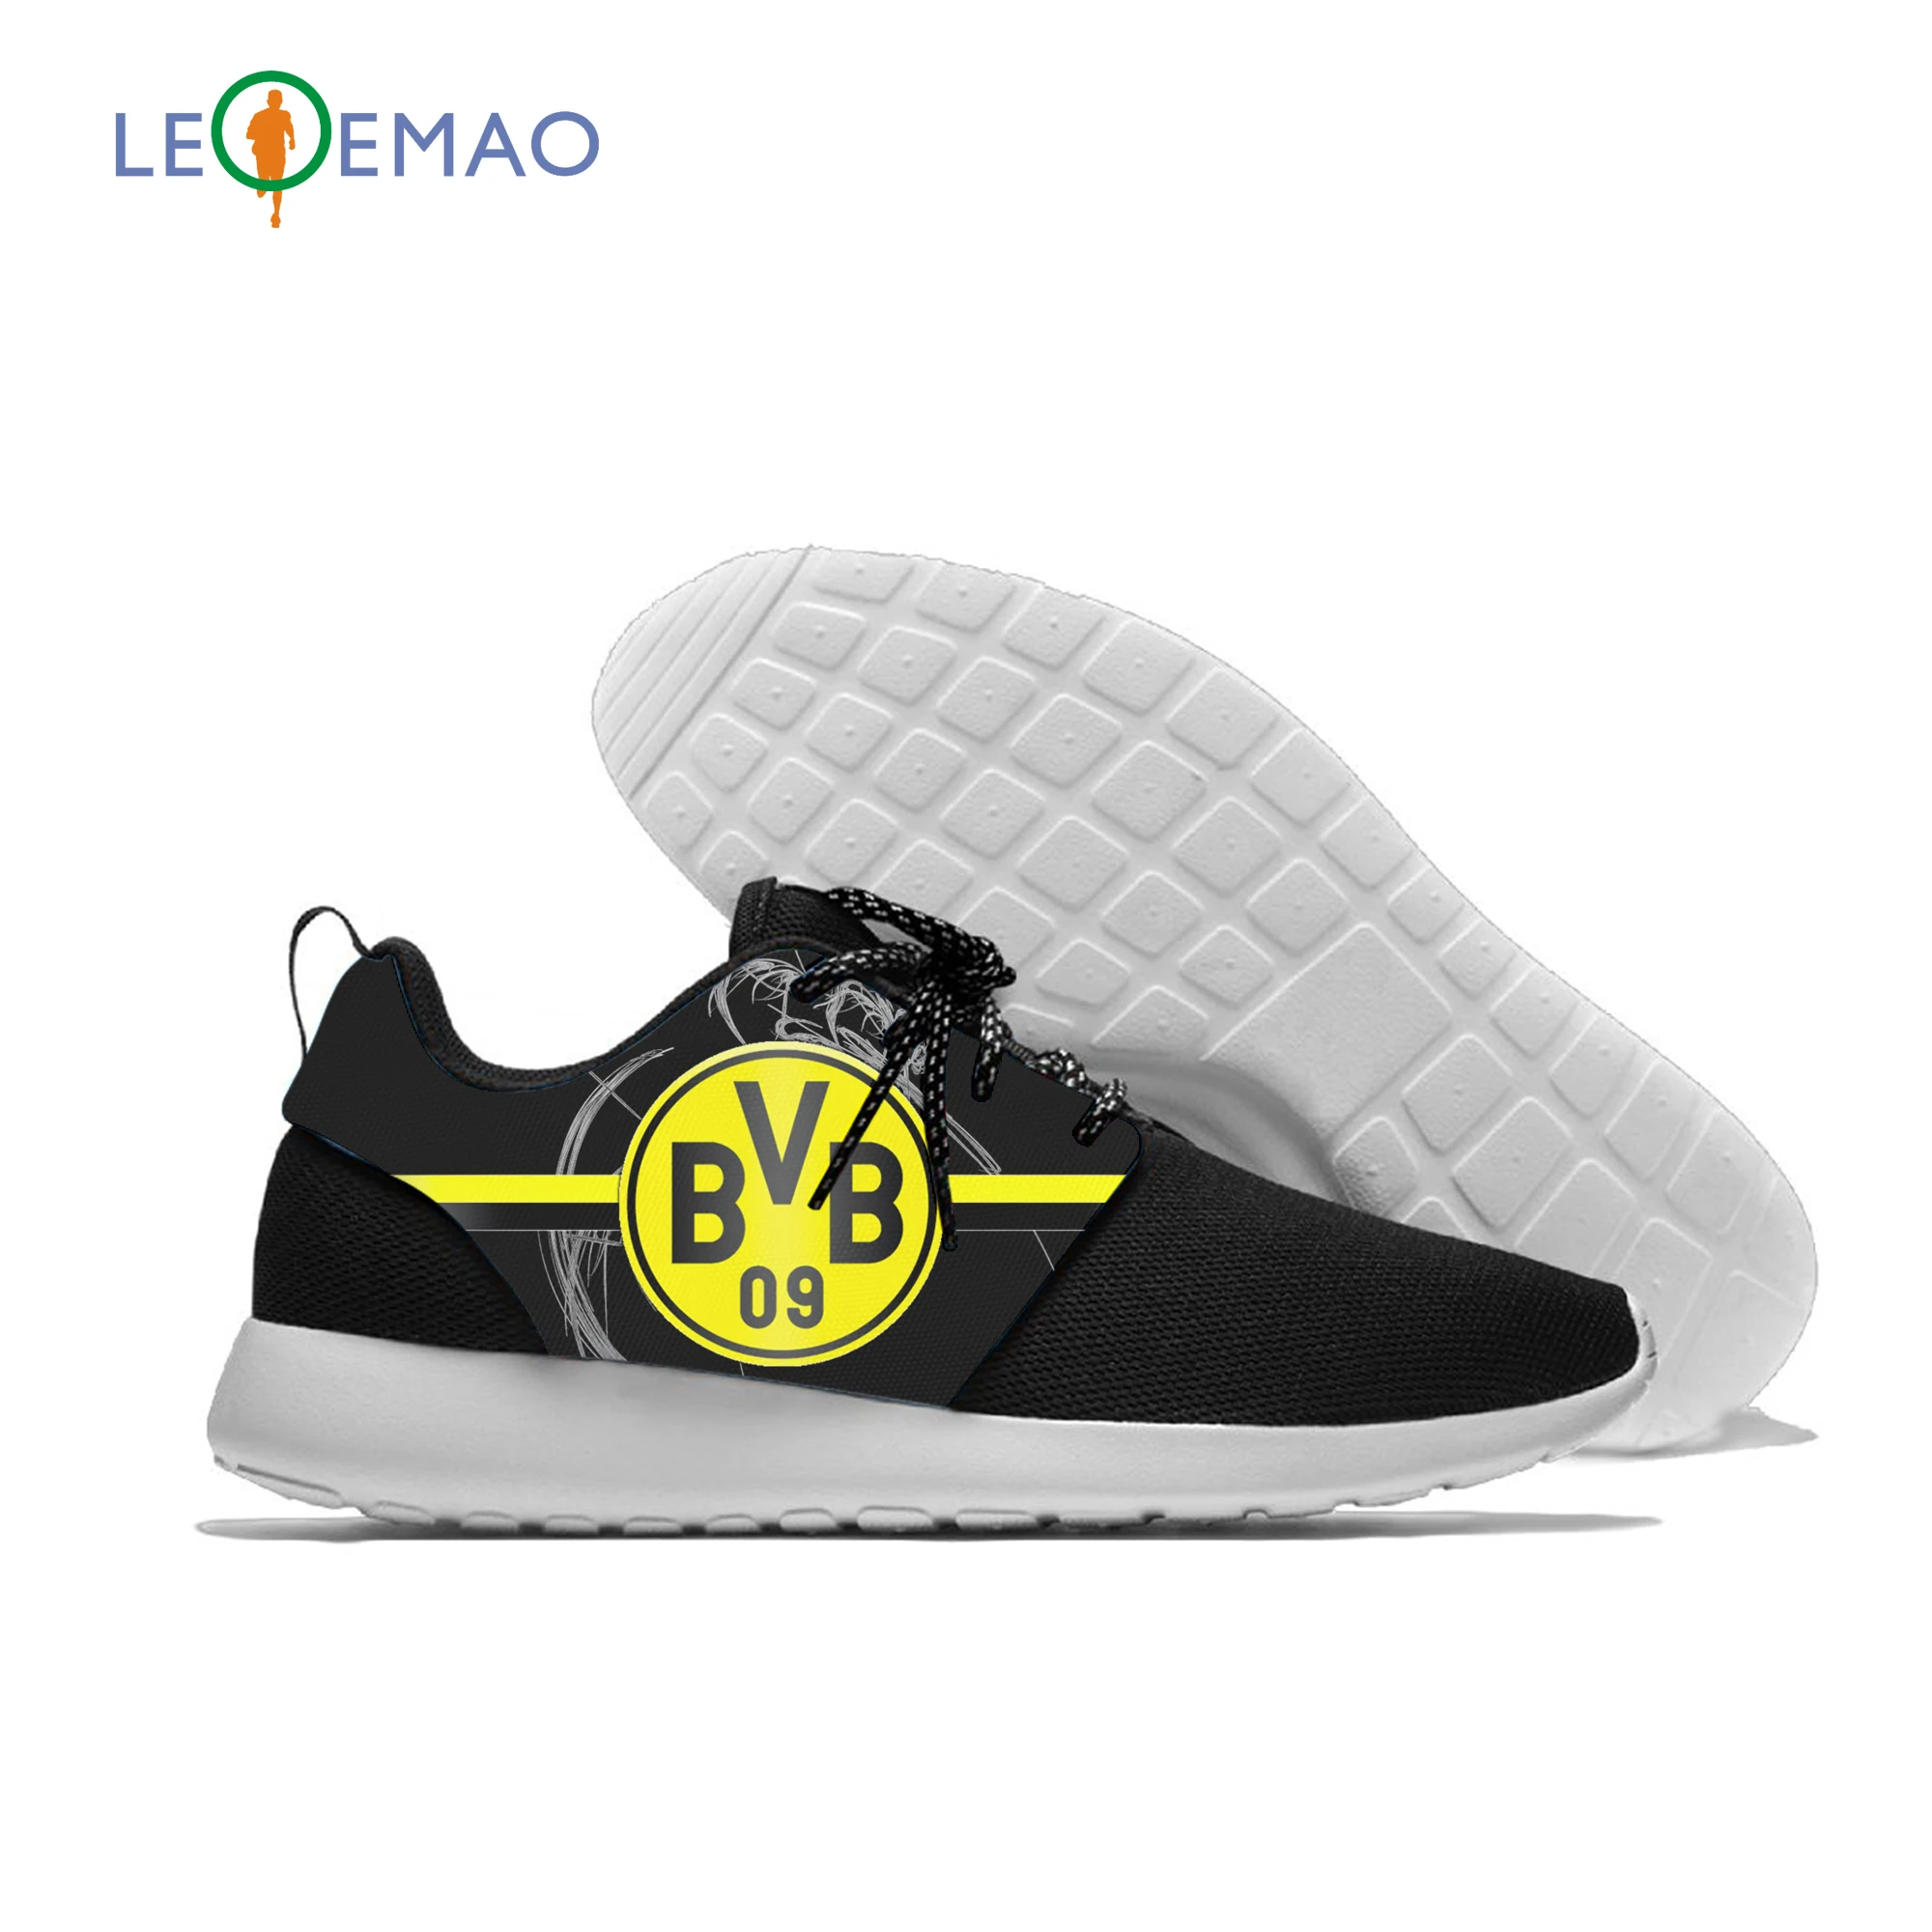 

2020 Miami Men's Women Dortmund 2019 Bowl LIV Champions Fashion Lightweight Low Top Breathable Sneakers For Borussia Fans Gift